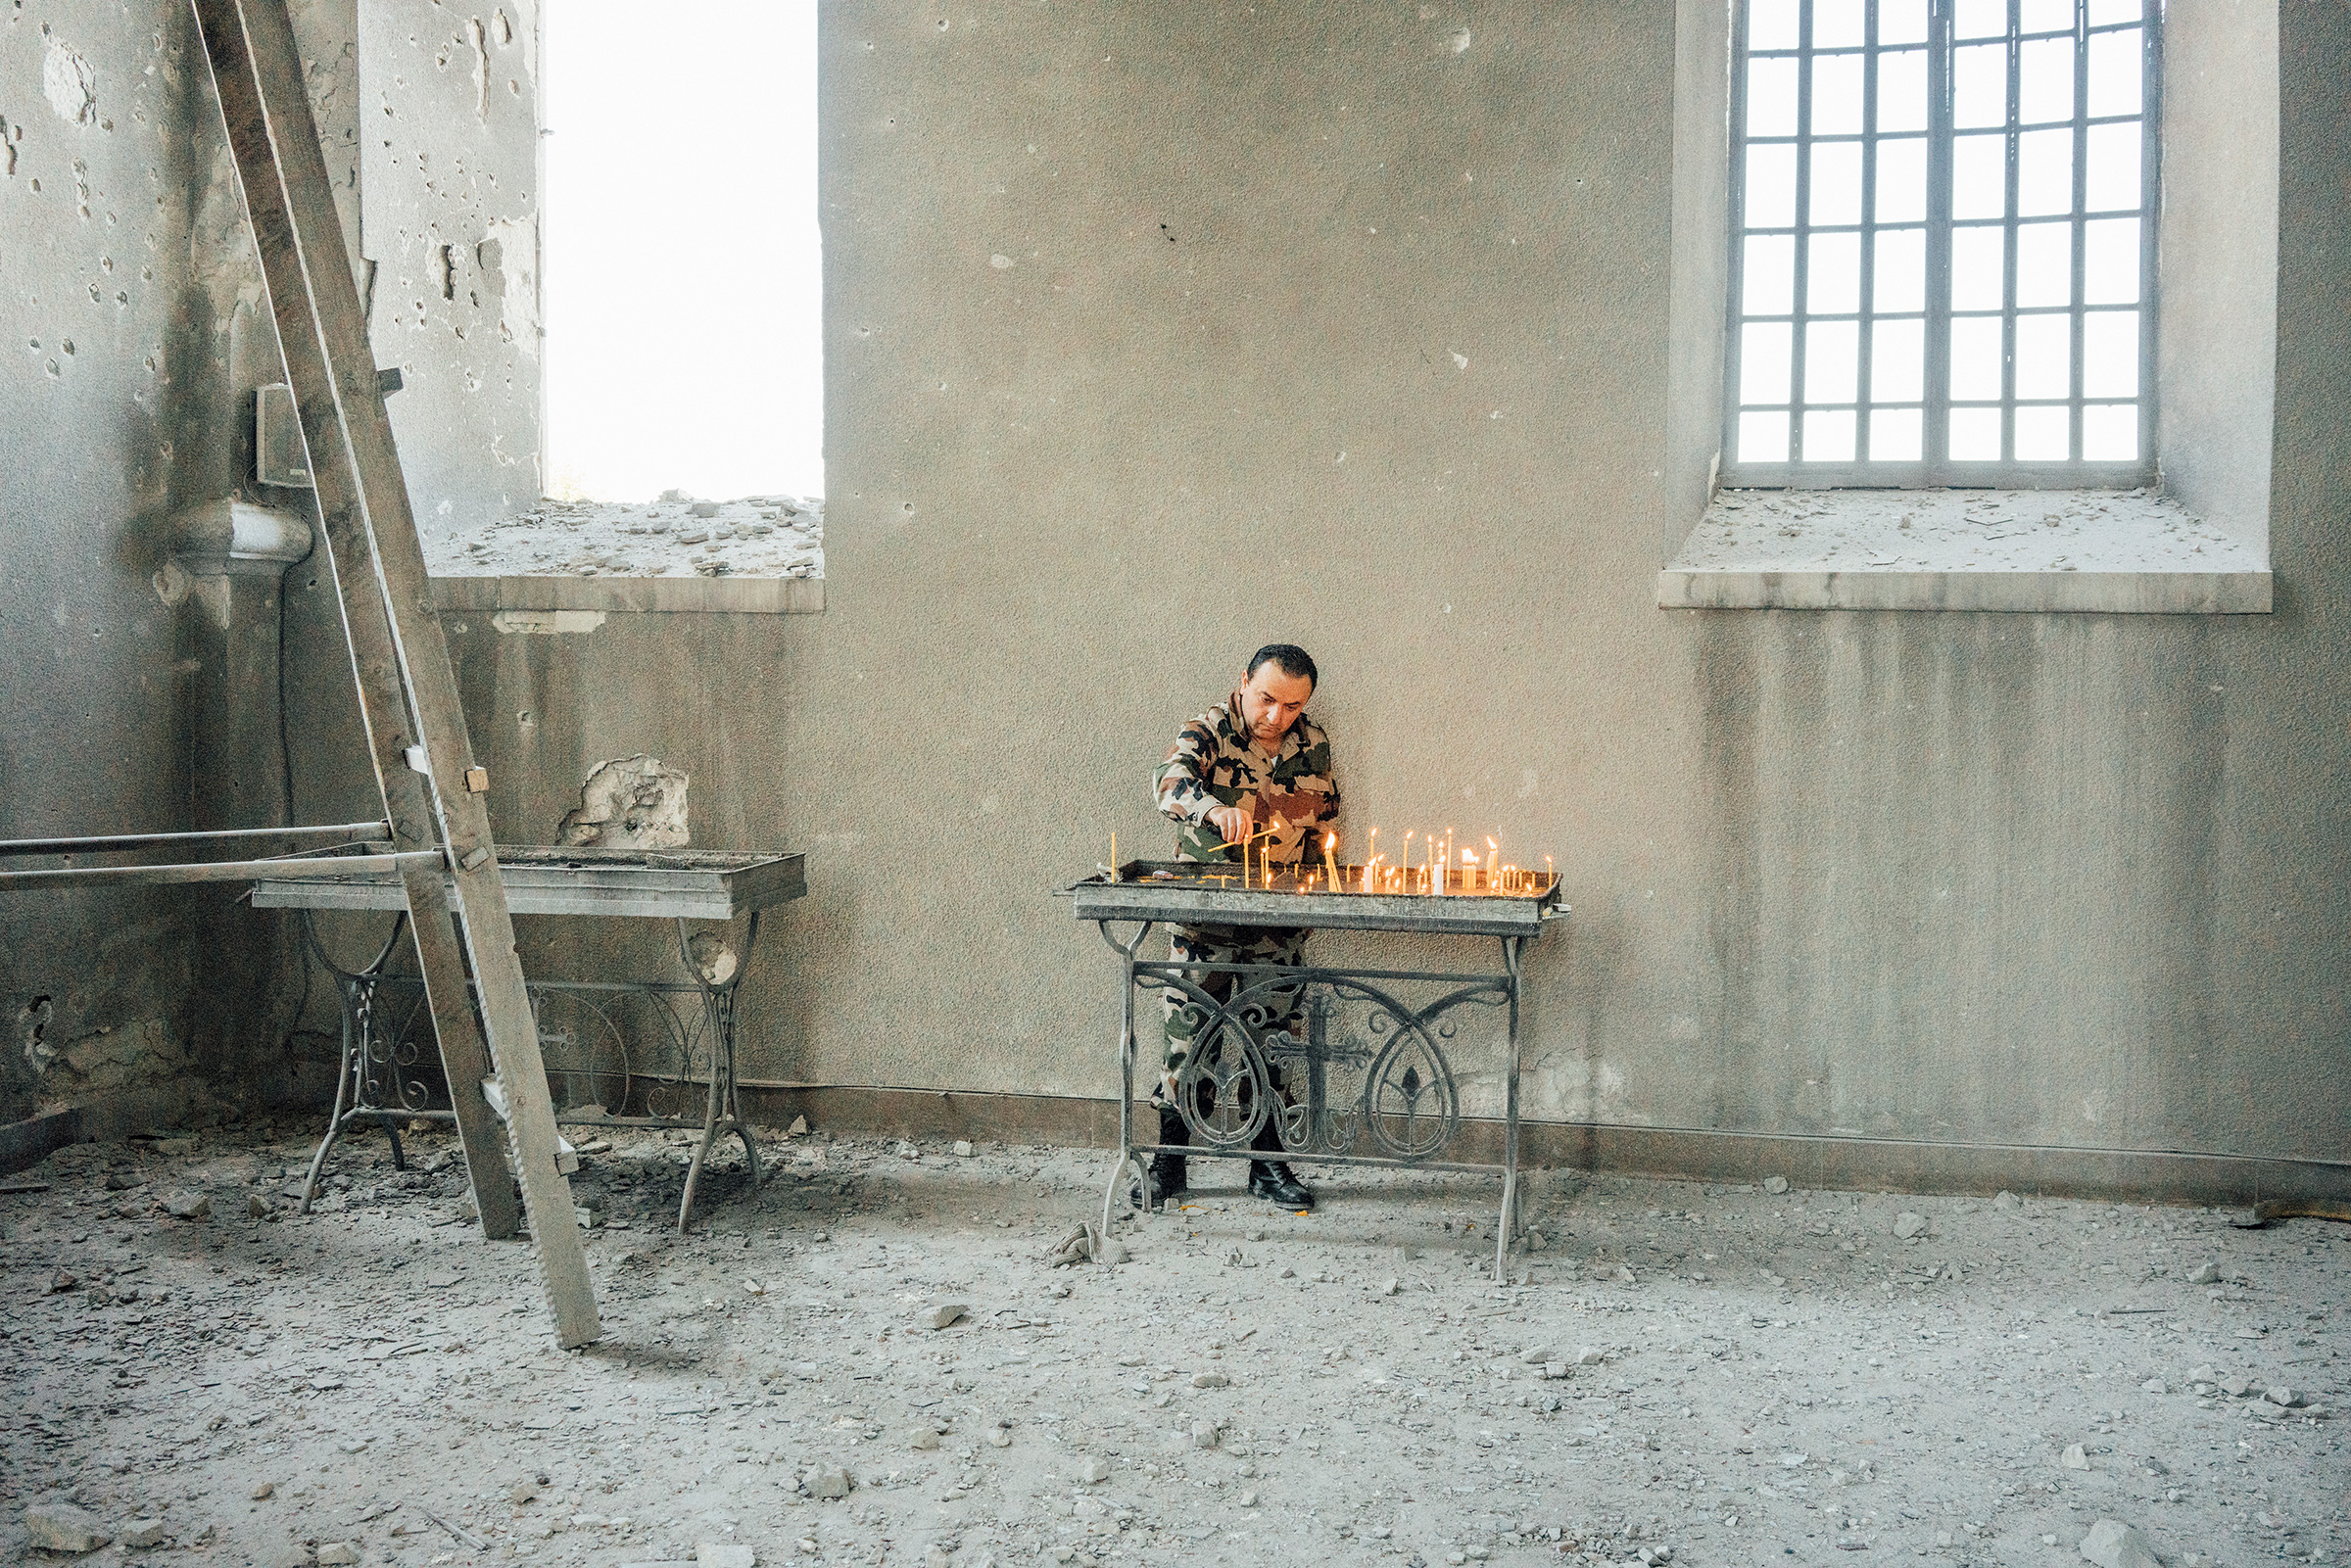 An Armenian soldier lights candles inside the Holy Savior Cathedral, which was damaged by shelling, in the town of Shusha outside Stepanakert.